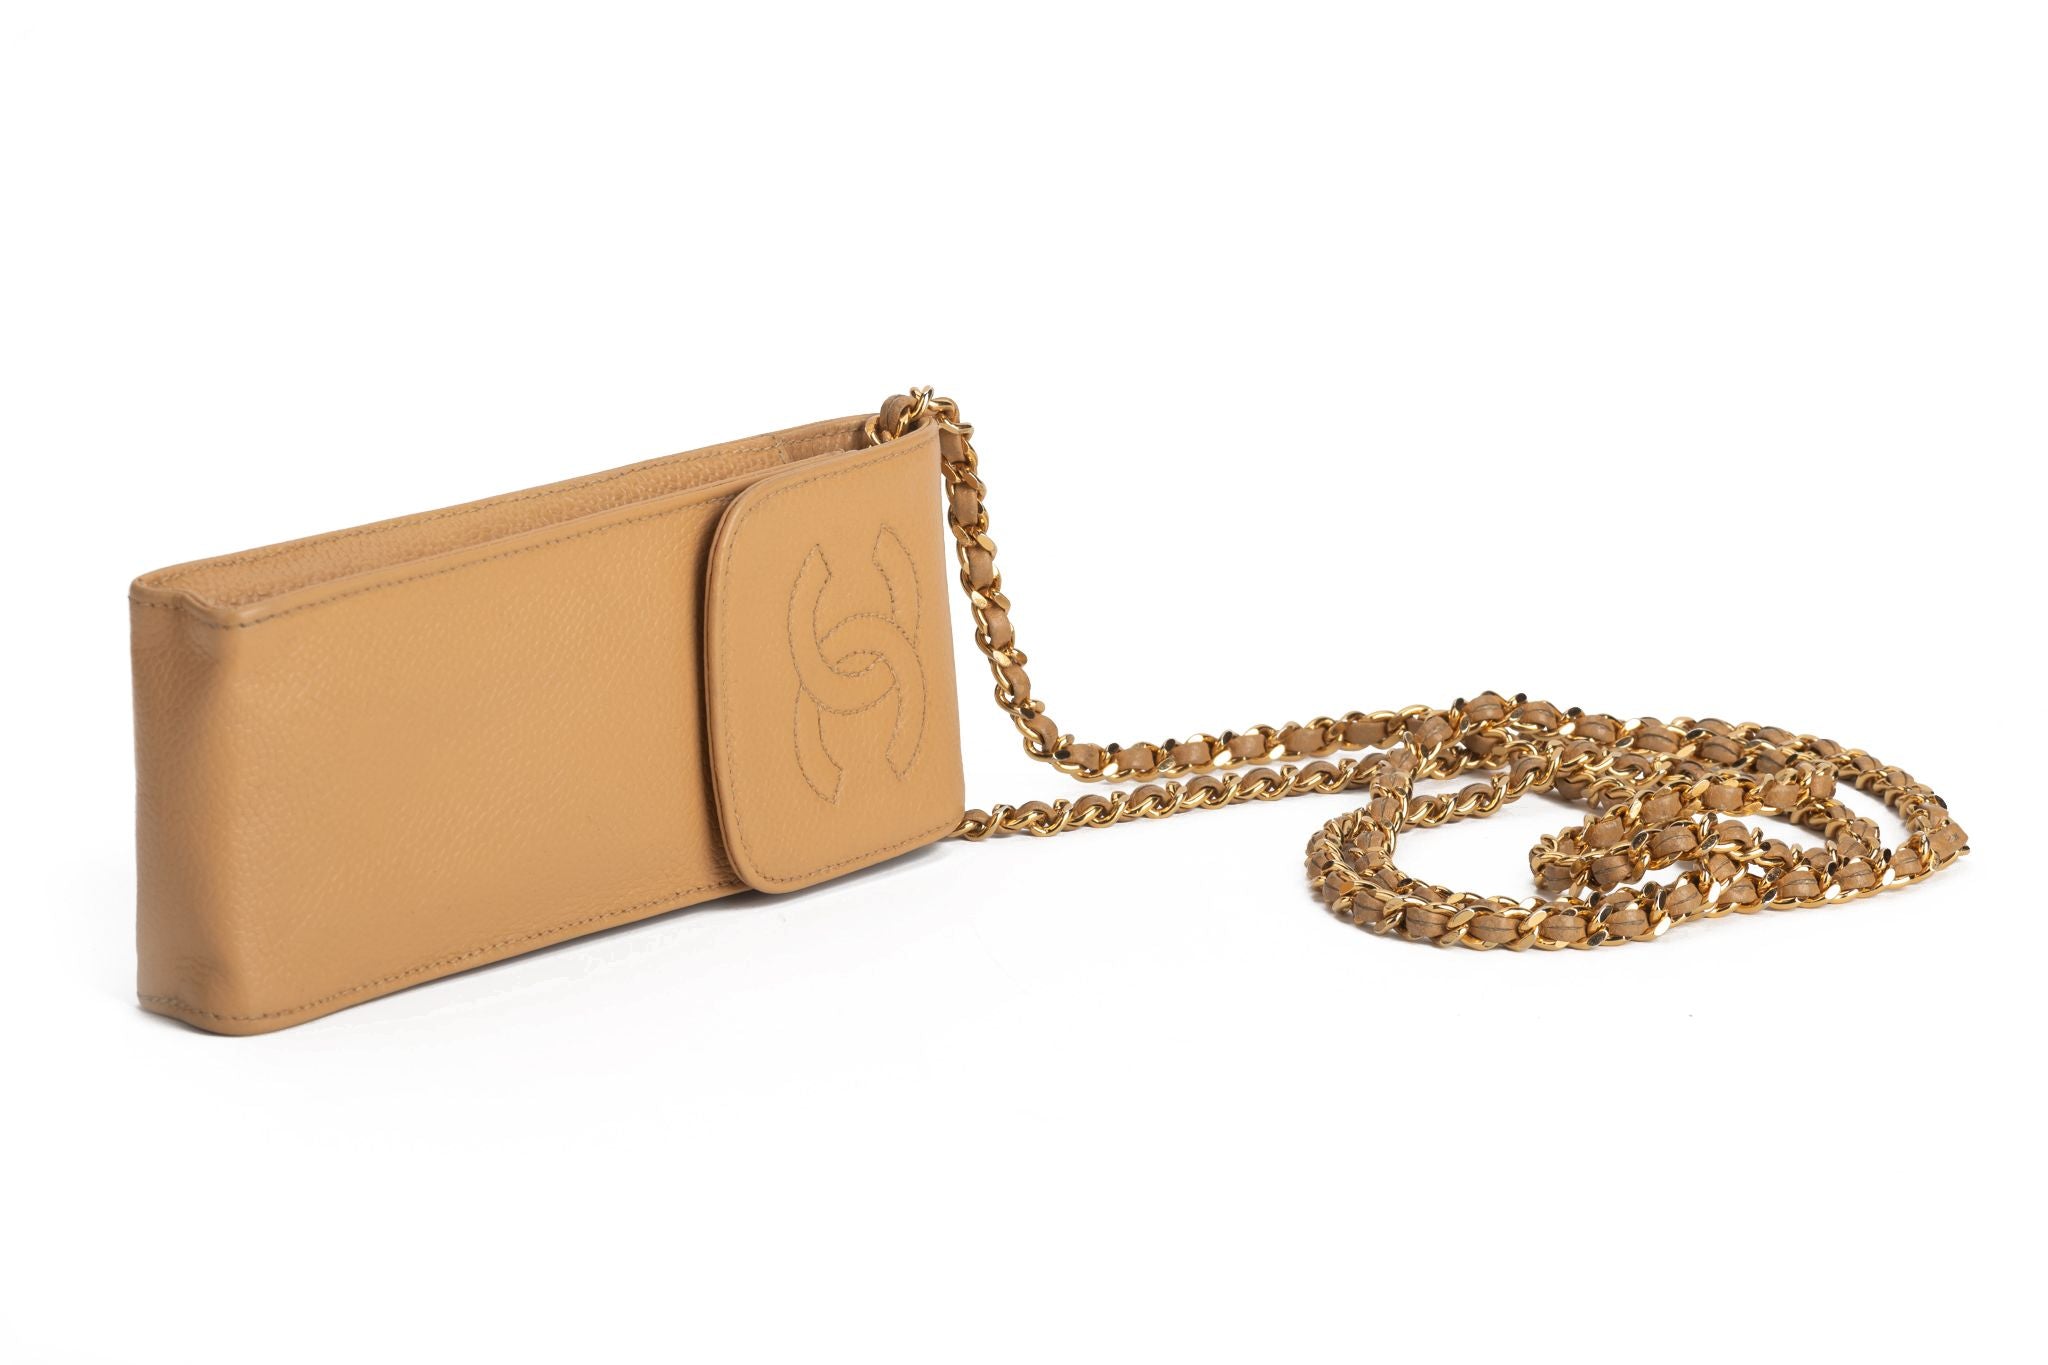 Chanel 90s Phone Necklace Beige